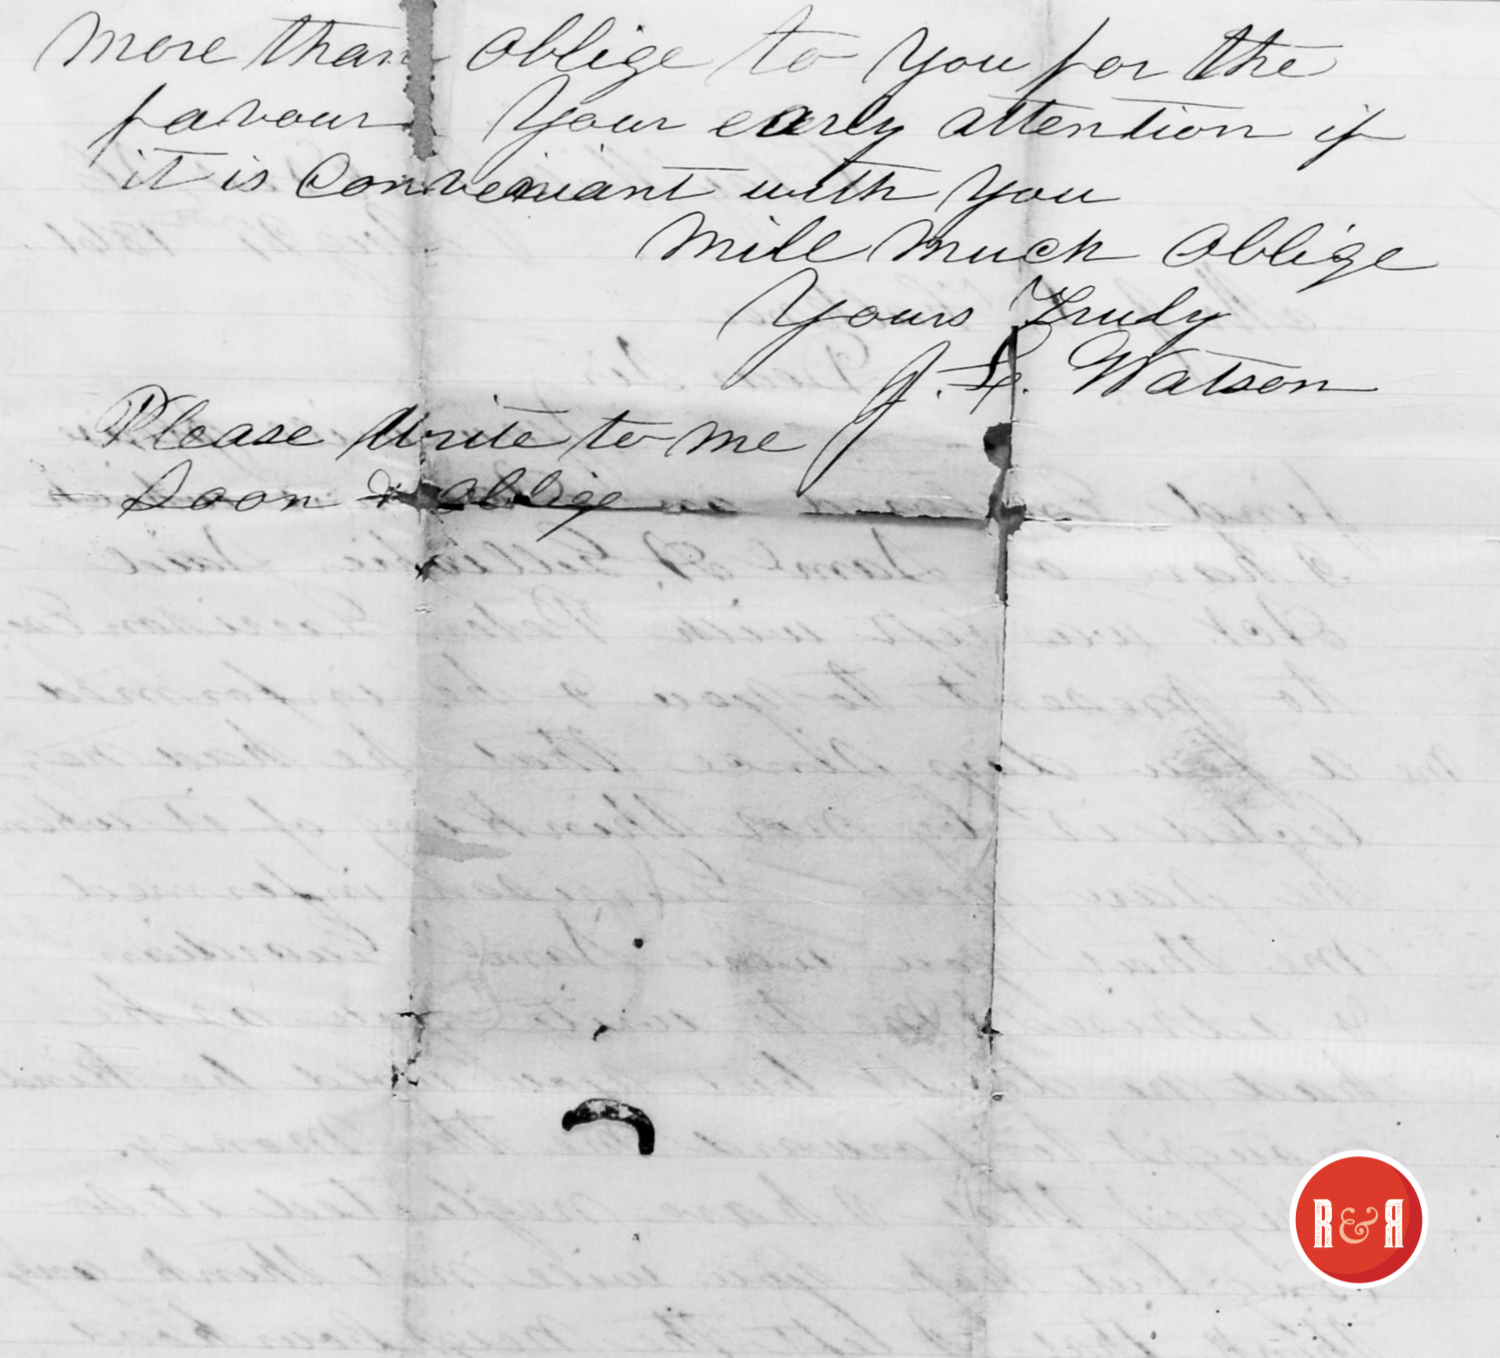 LETTER MARKED CLAY HILL, S.C. 1861 - FAULKNER COLLECTION, P. 2